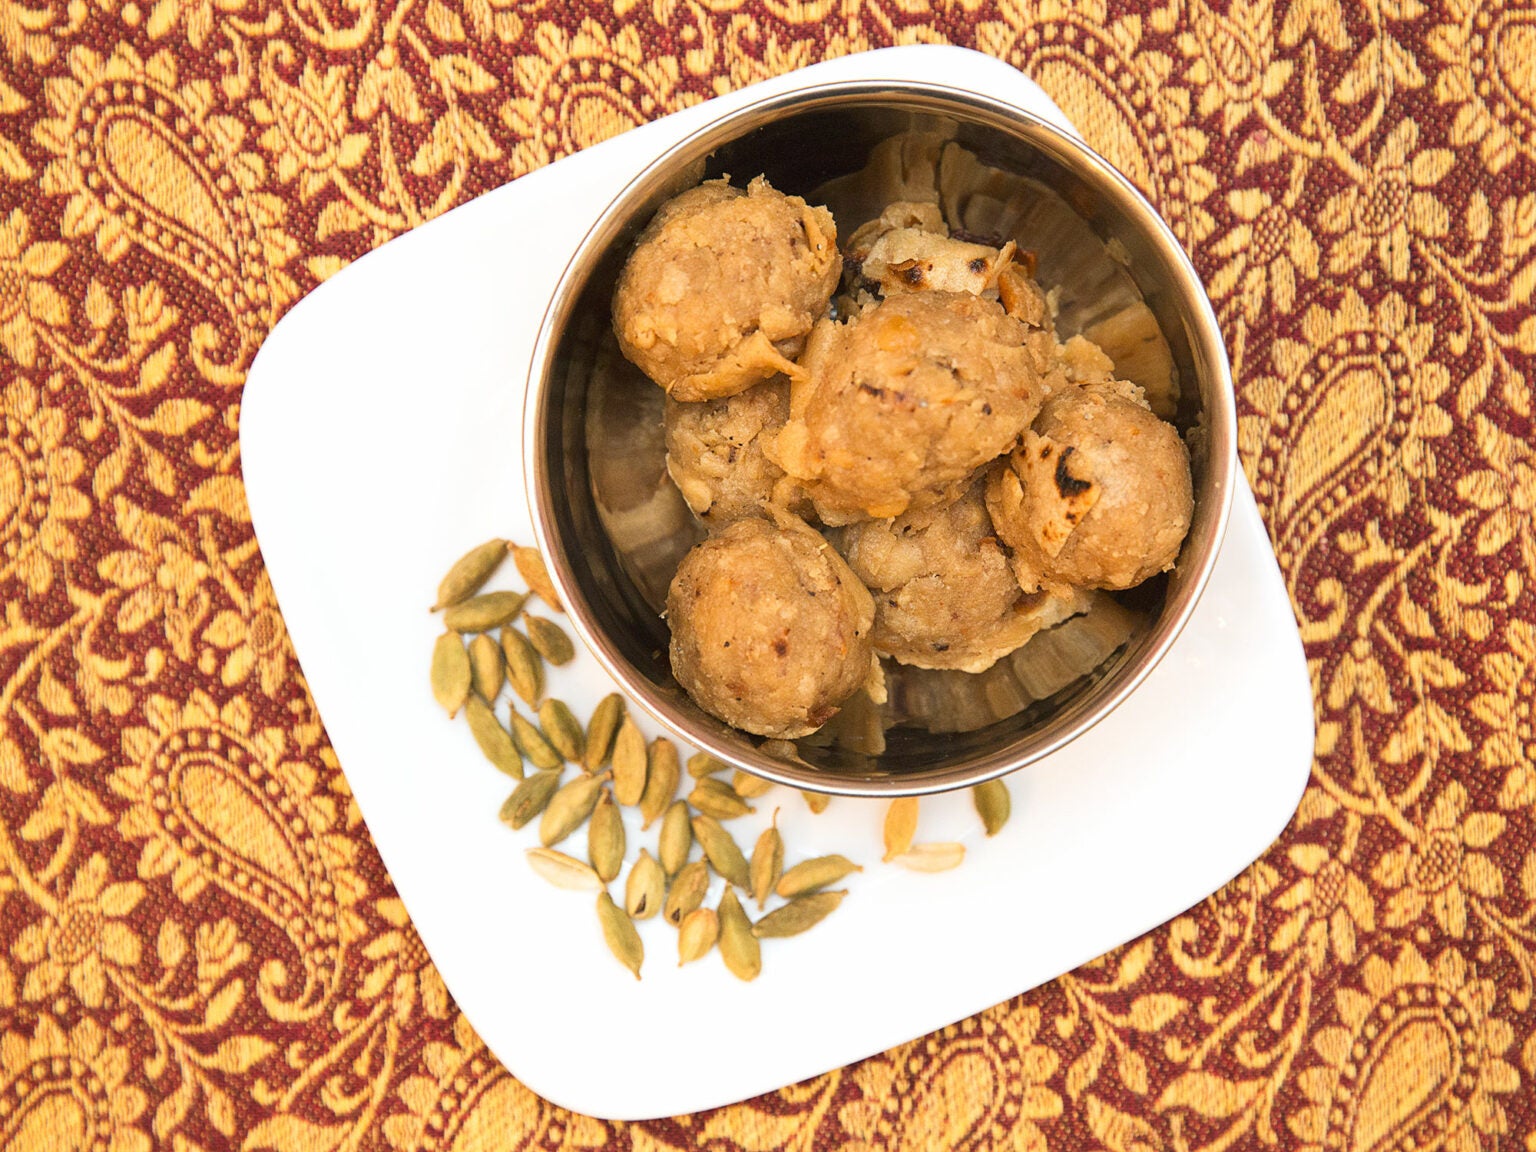 Spiced Indian Cake Balls is a Free Recipe by Yamini Joshi from Saveur!